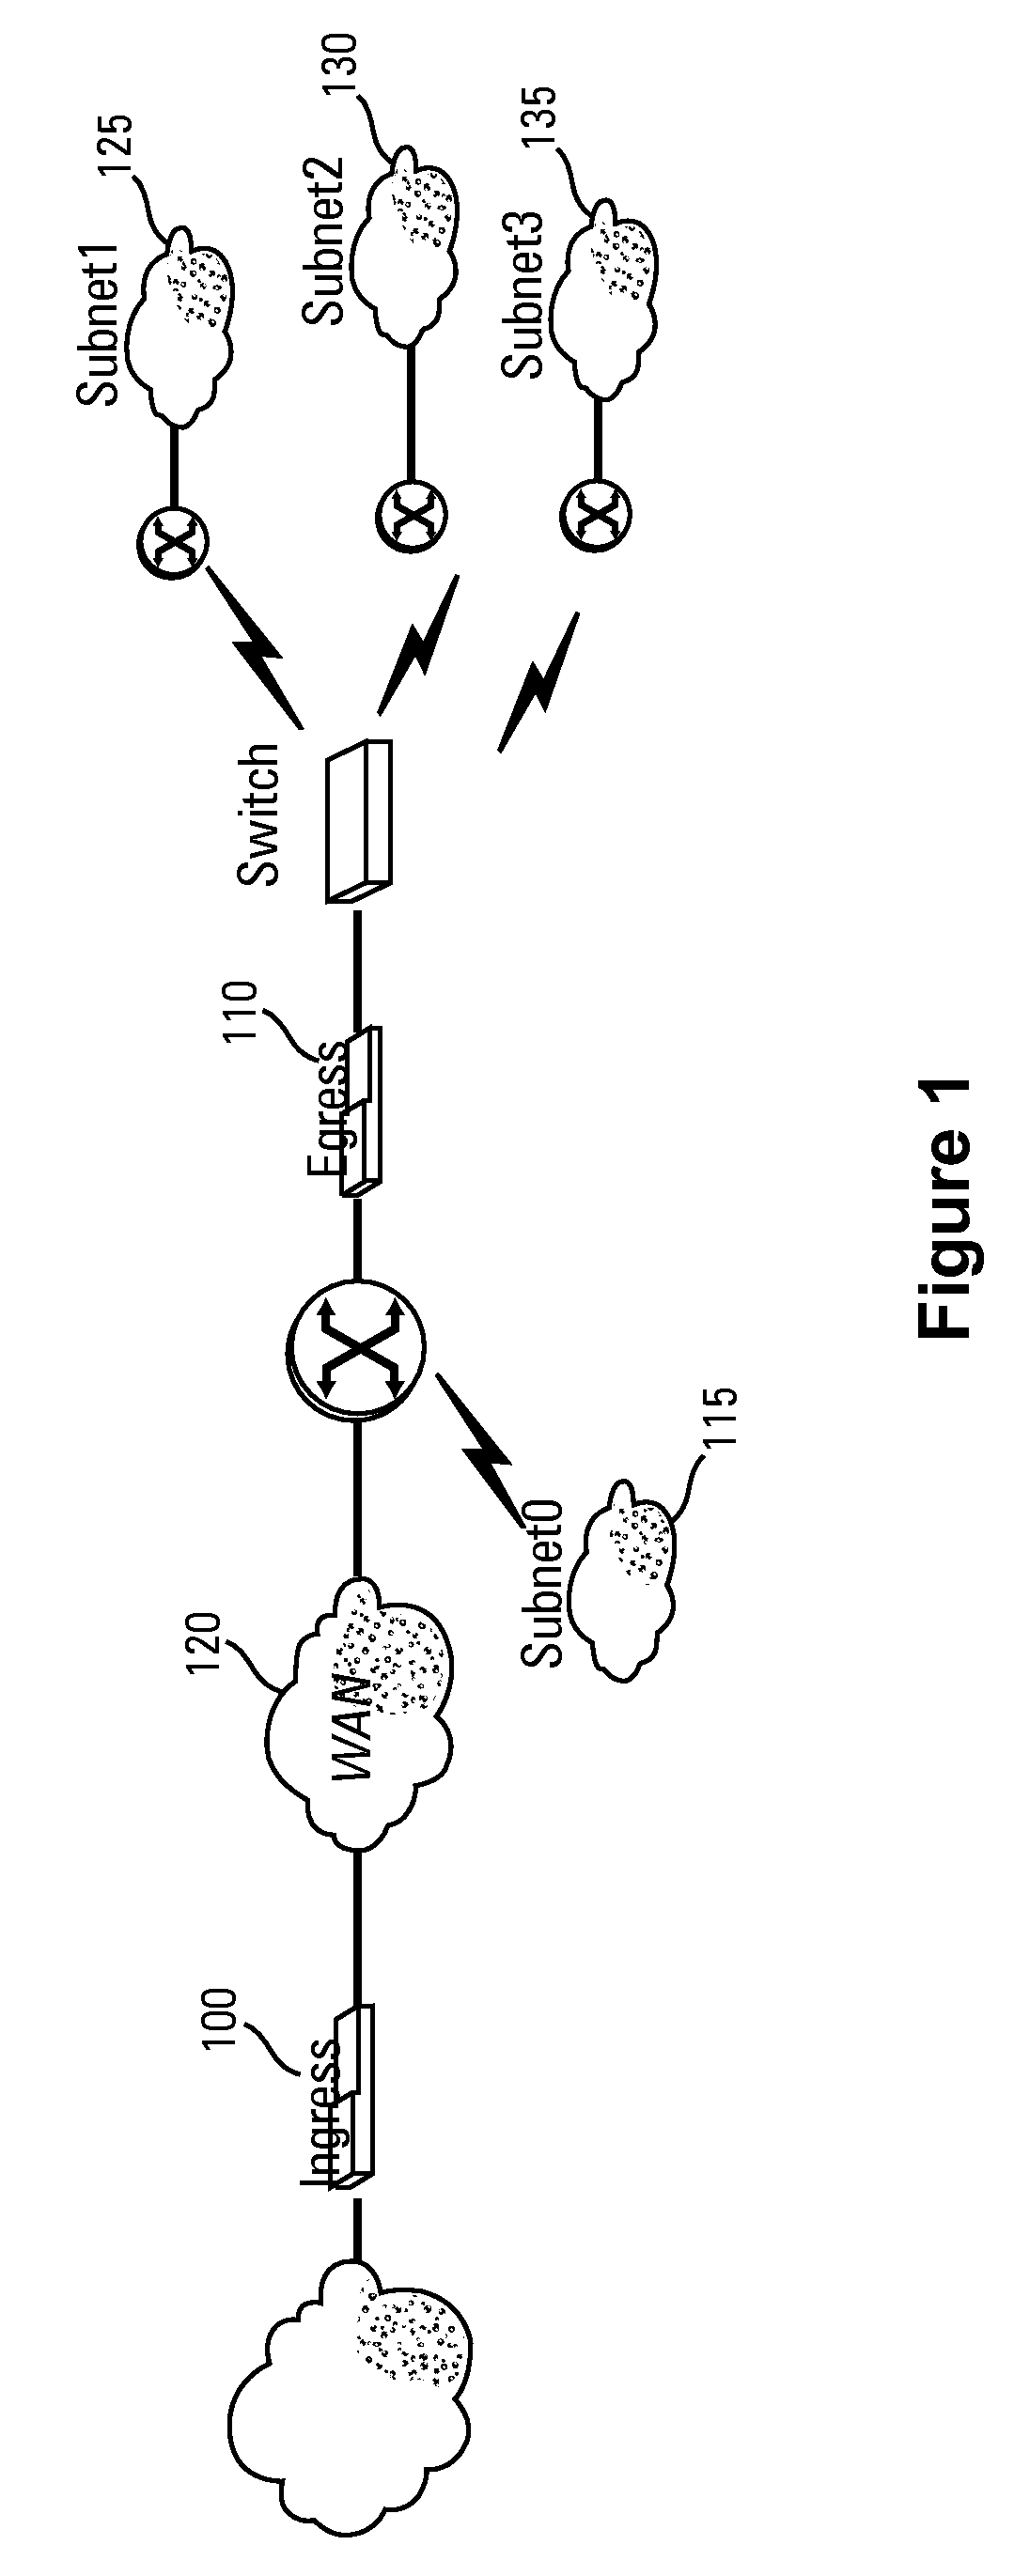 Efficient discovery and verification of paths through a meshed overlay network